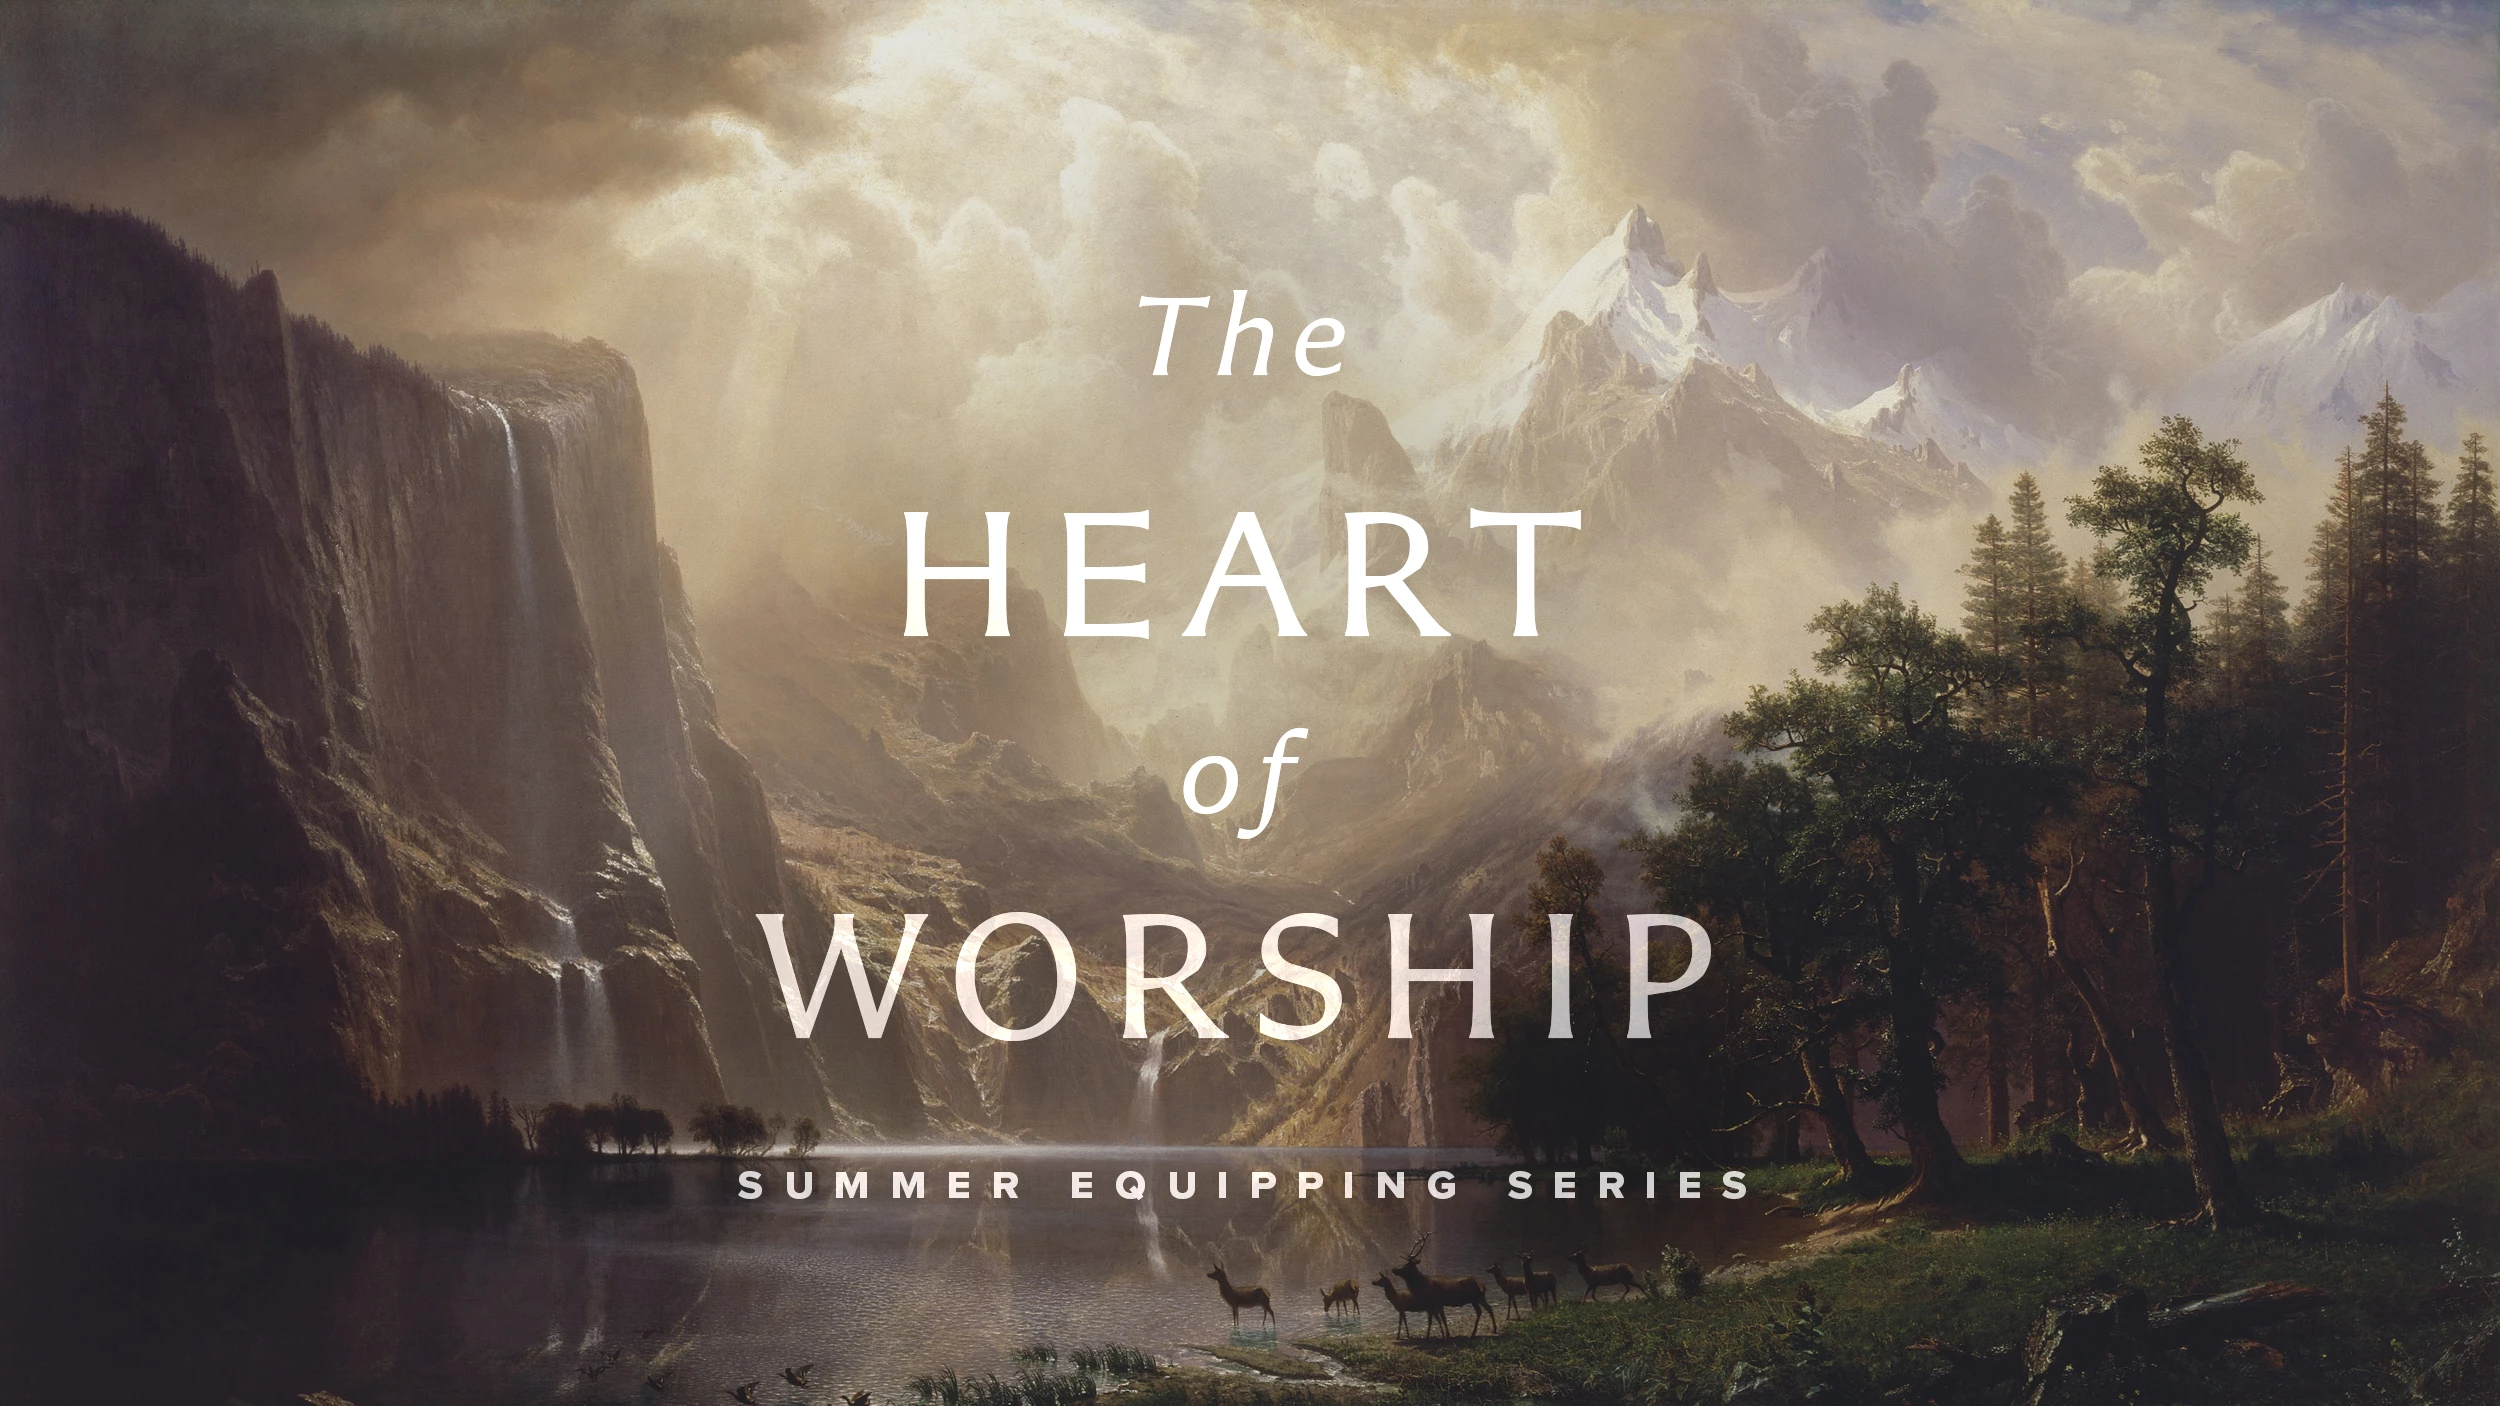 The Heart of Worship graphic